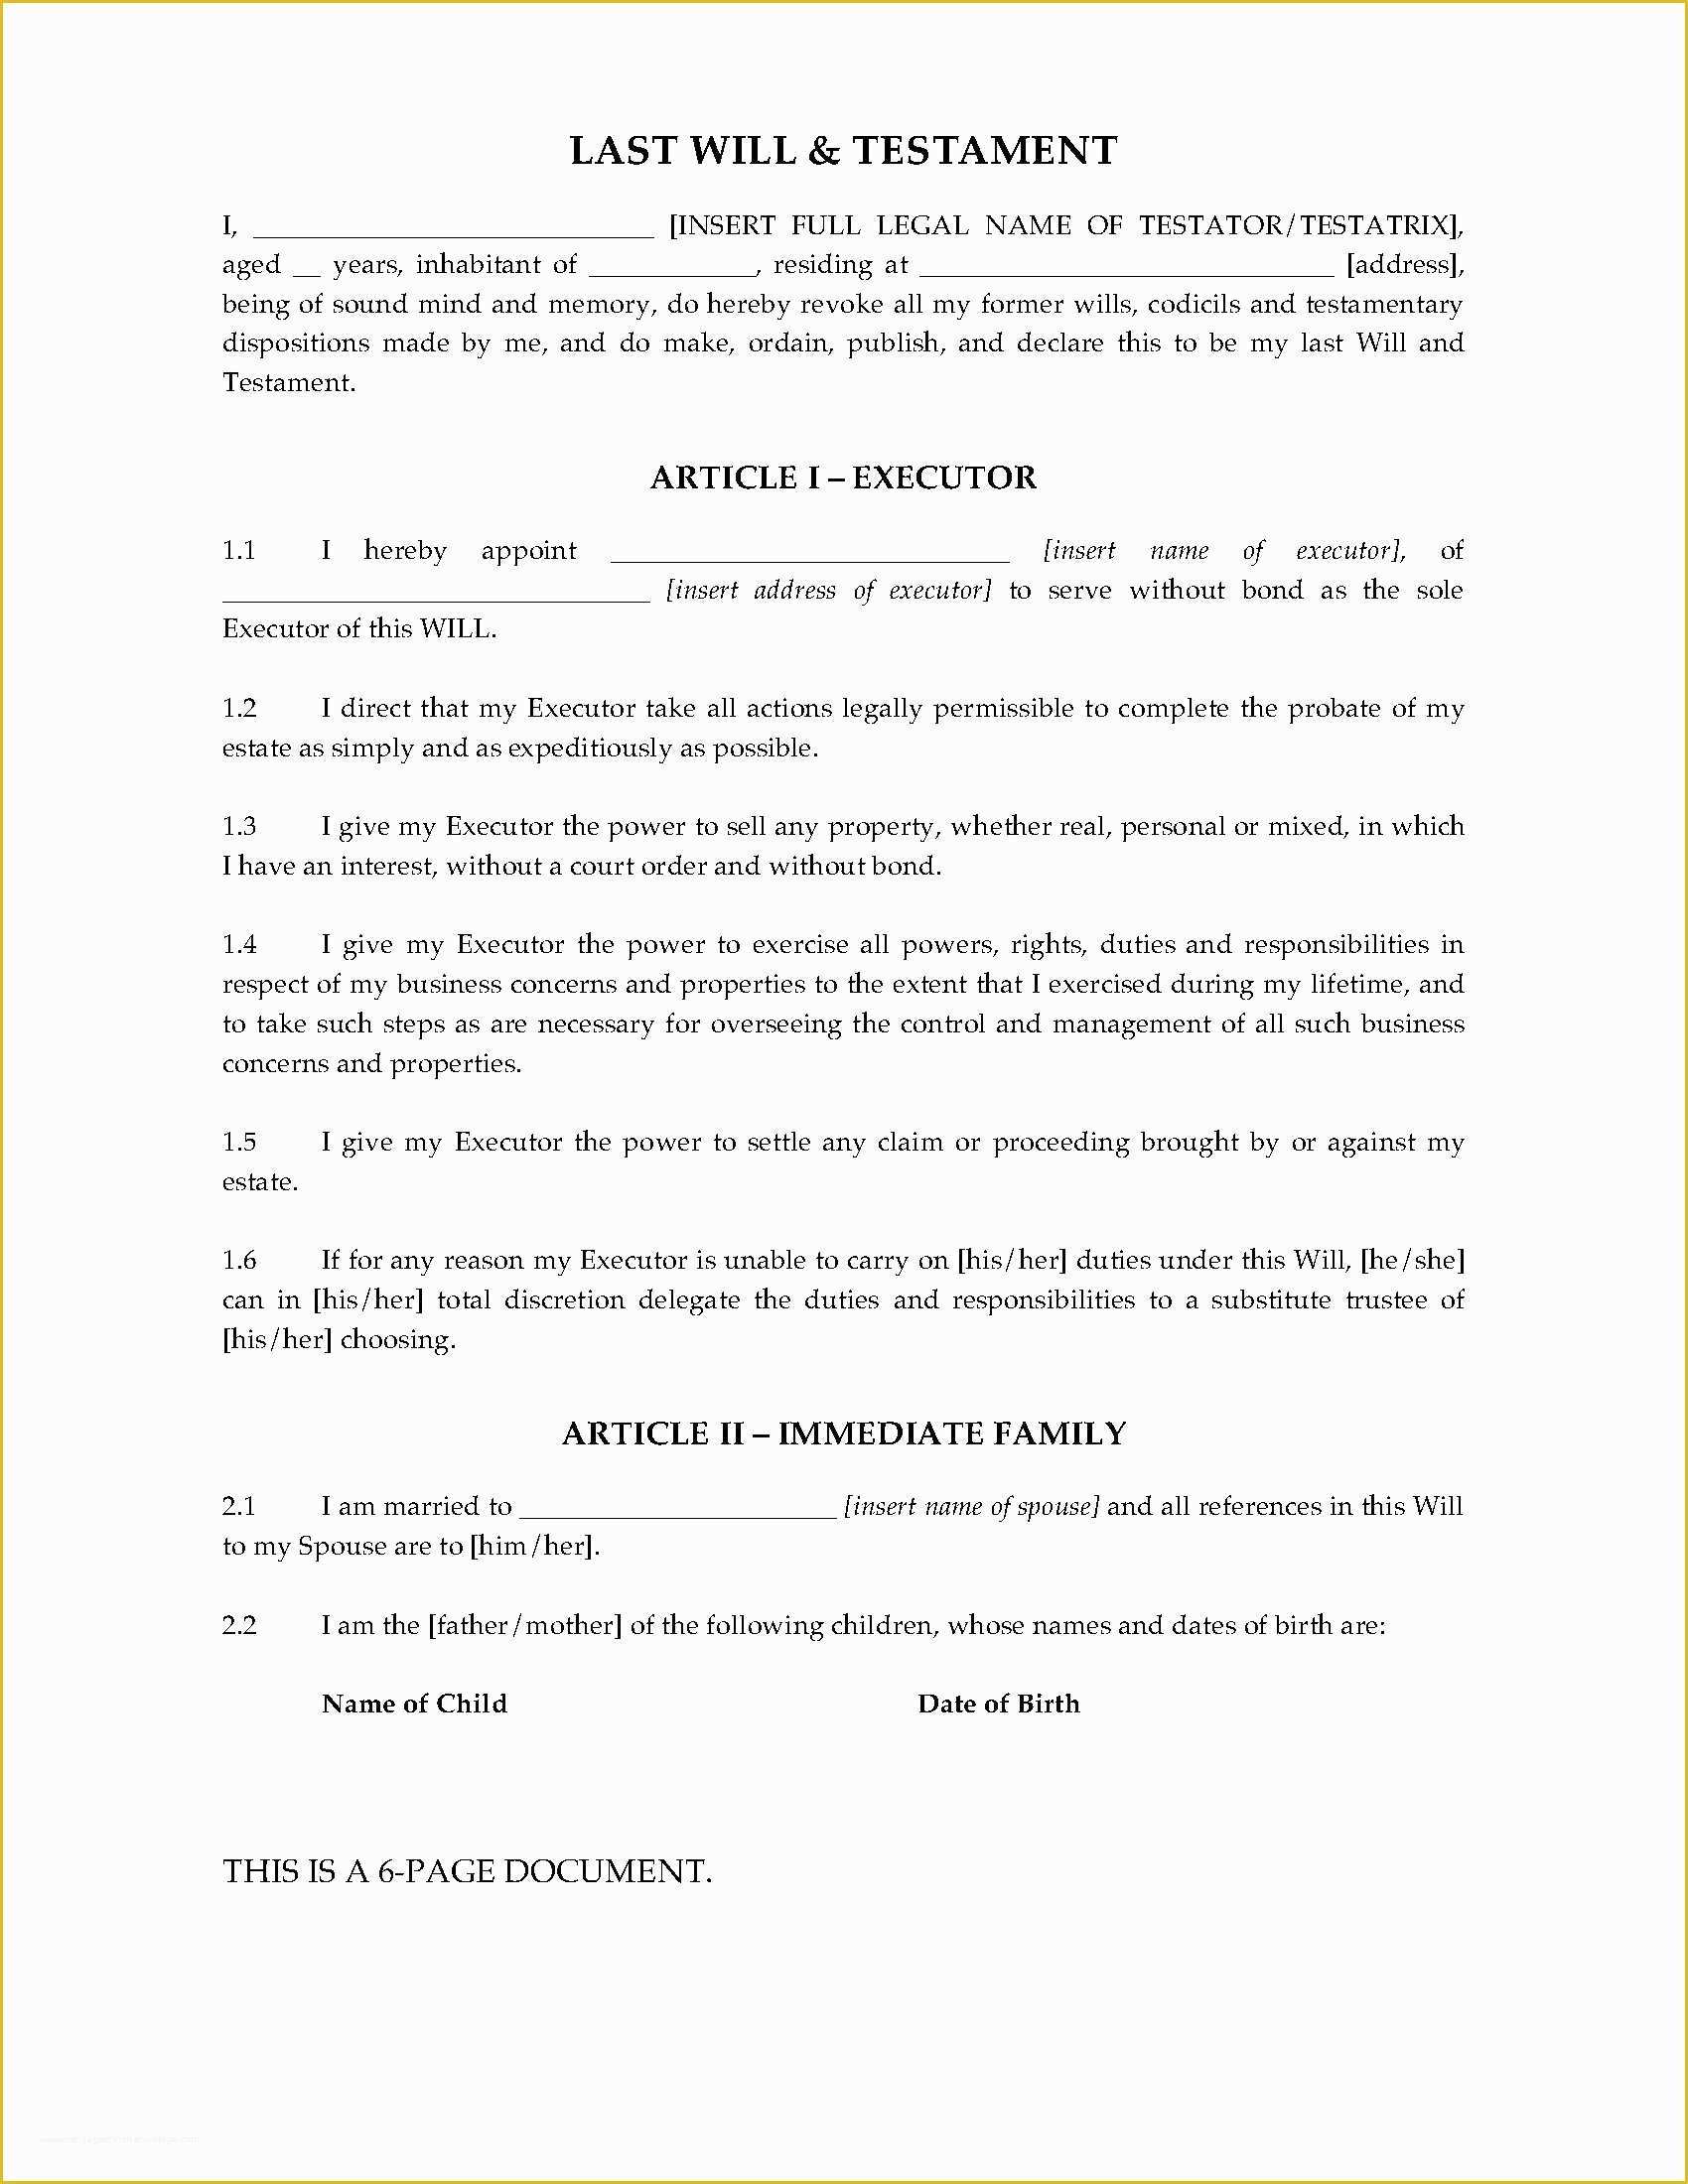 Last Will and Testament Arizona Template Free Of India Last Will and